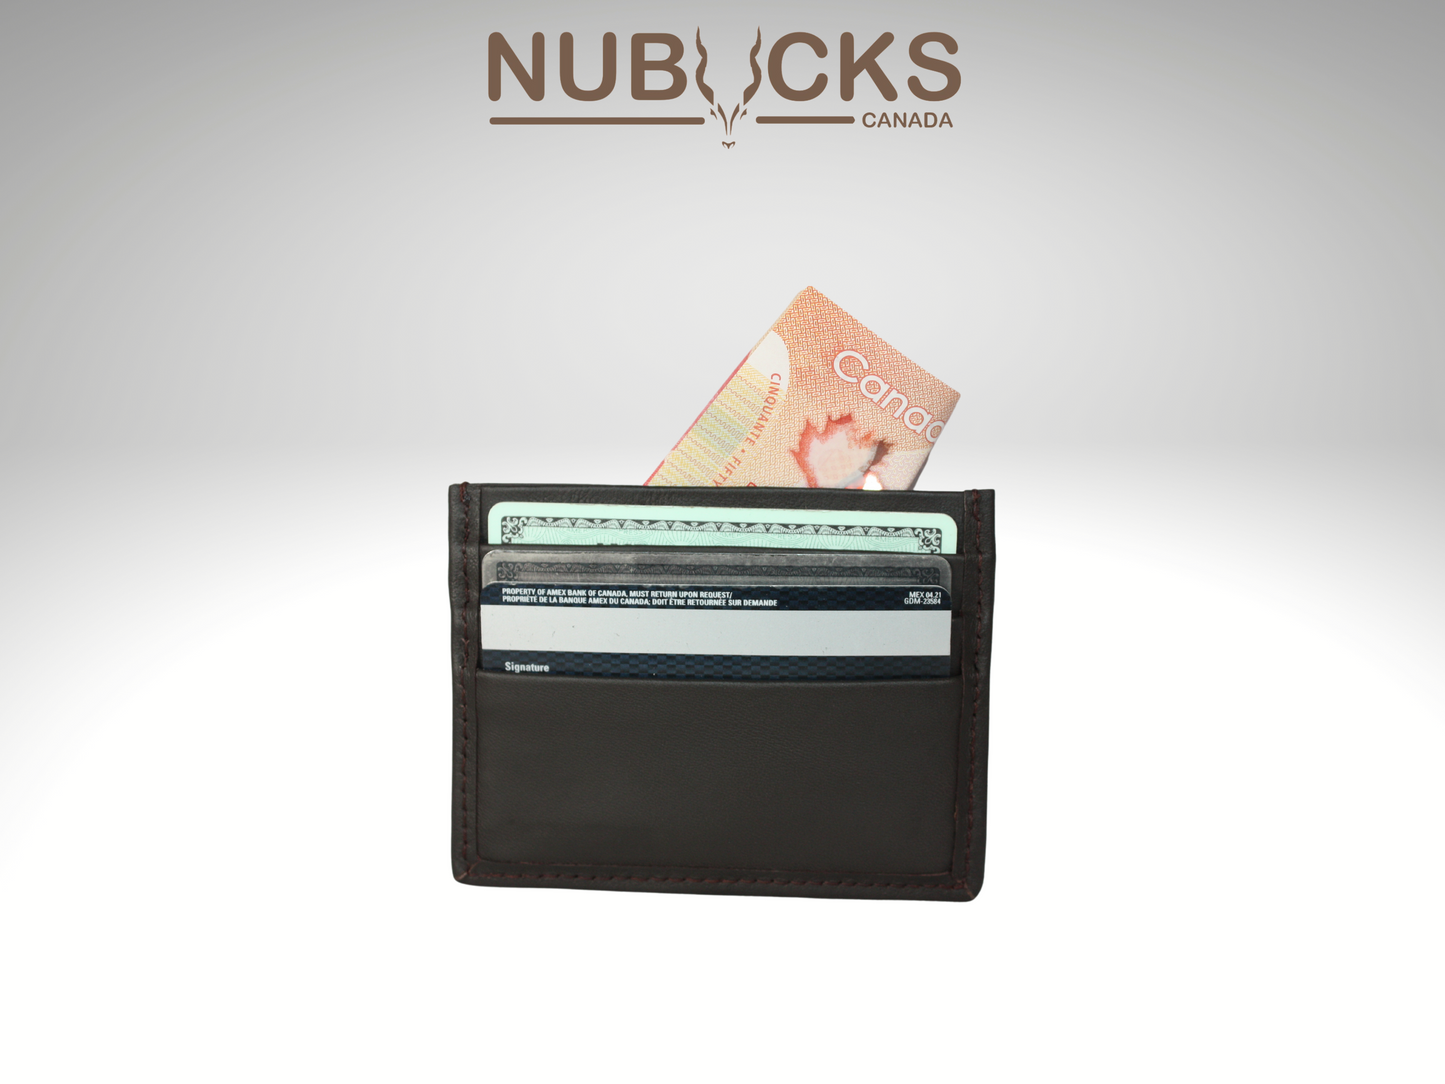 nubucks canada card keeper back view with 6 cards and $50 bill in cash slot